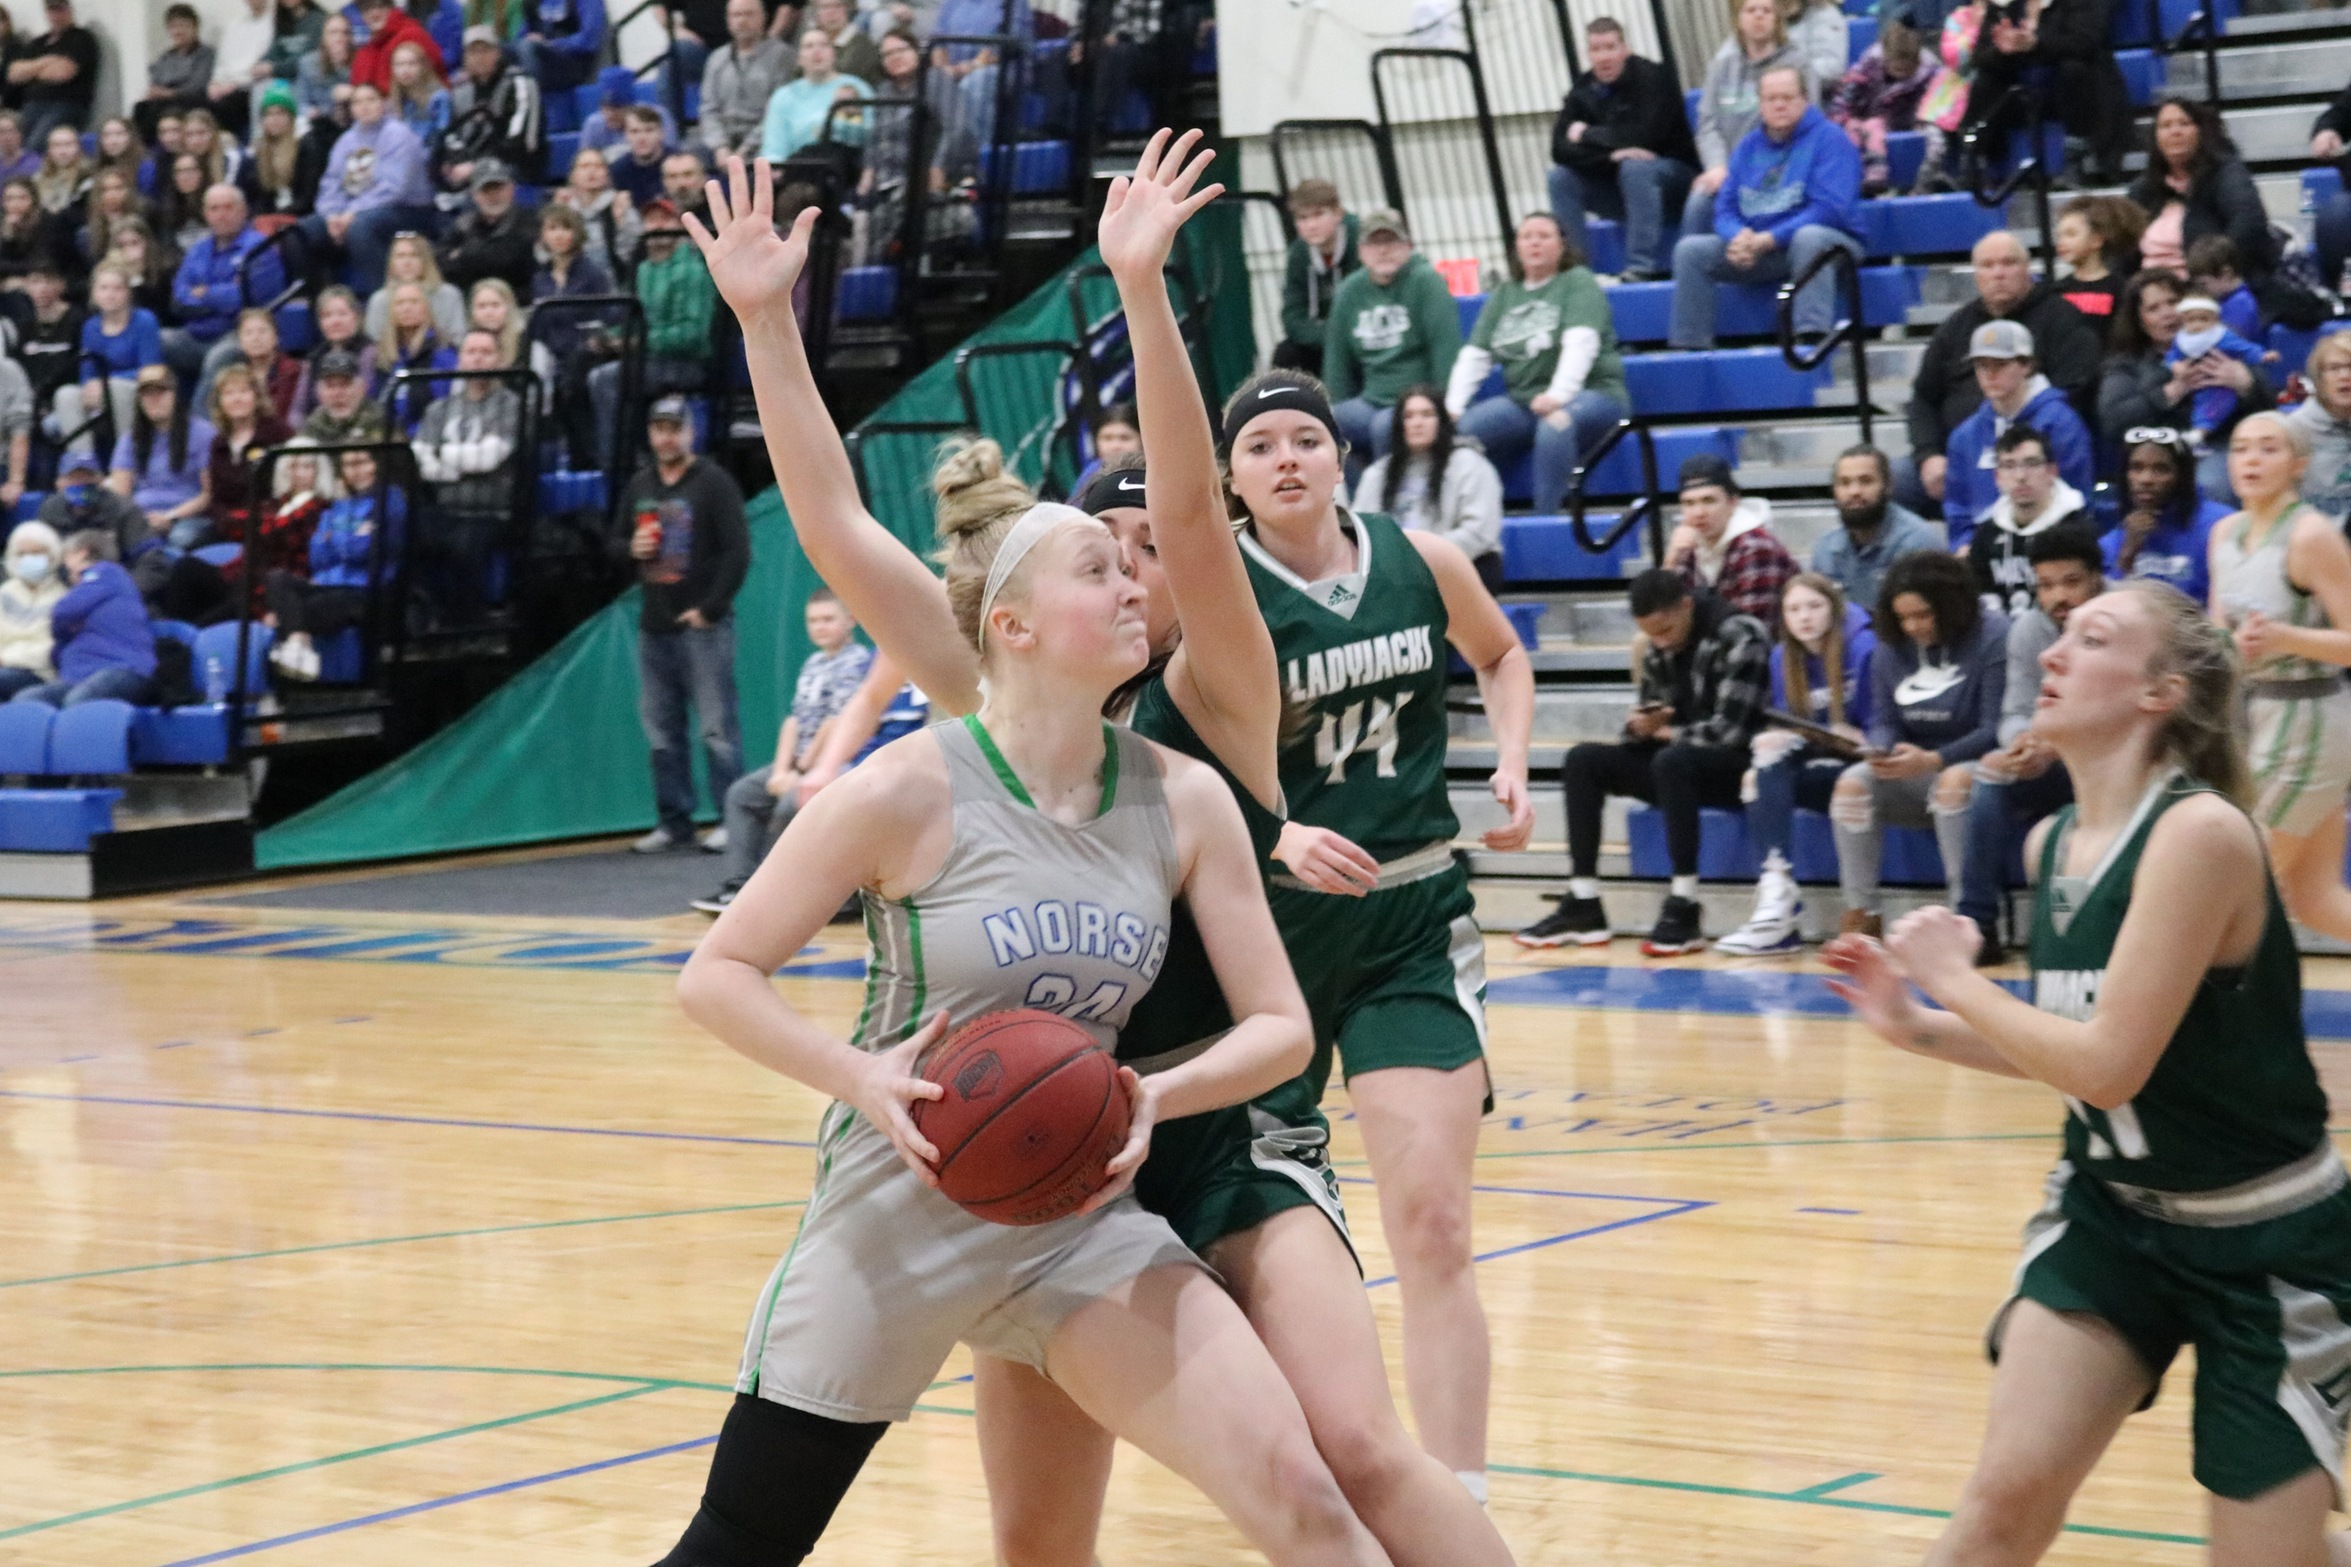 Madison Olsen moves to the rim in the post with a defender closely gaurding